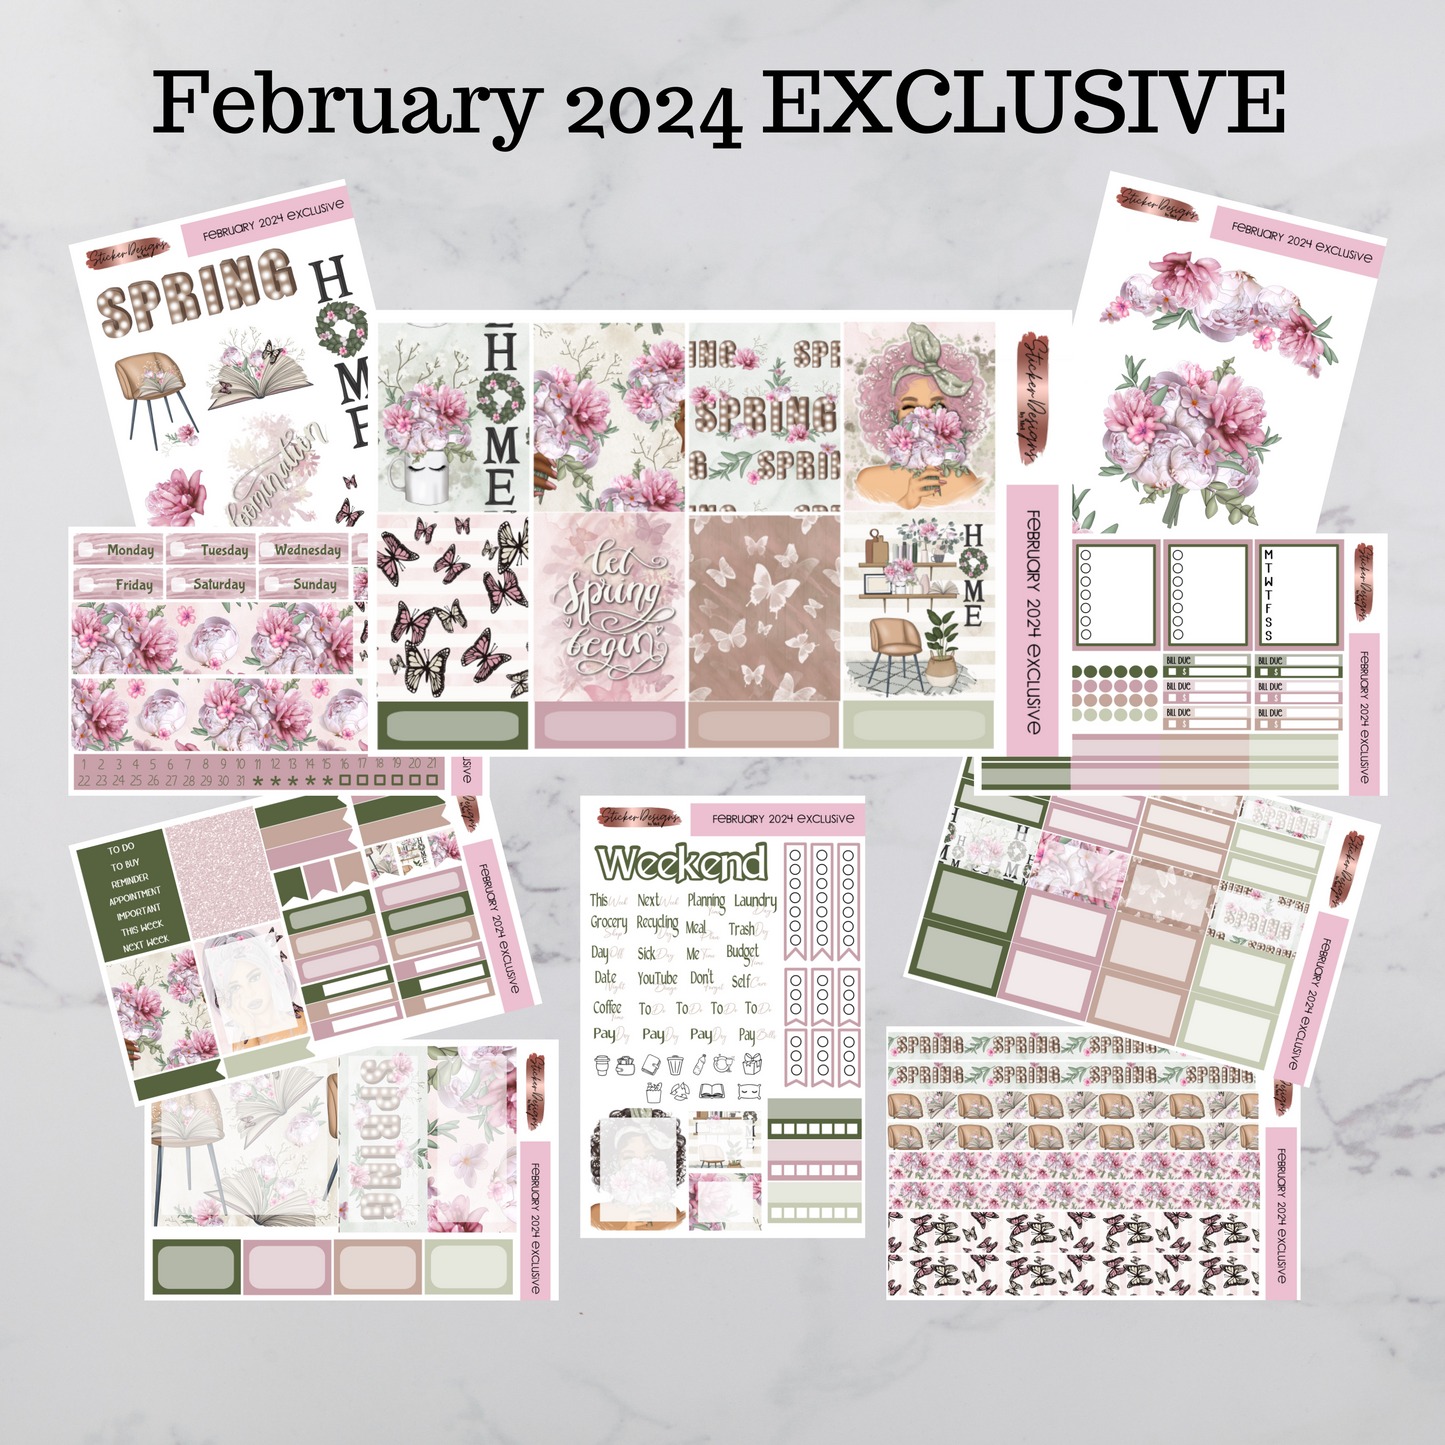 February 2024 Exclusive - Vertical Layout